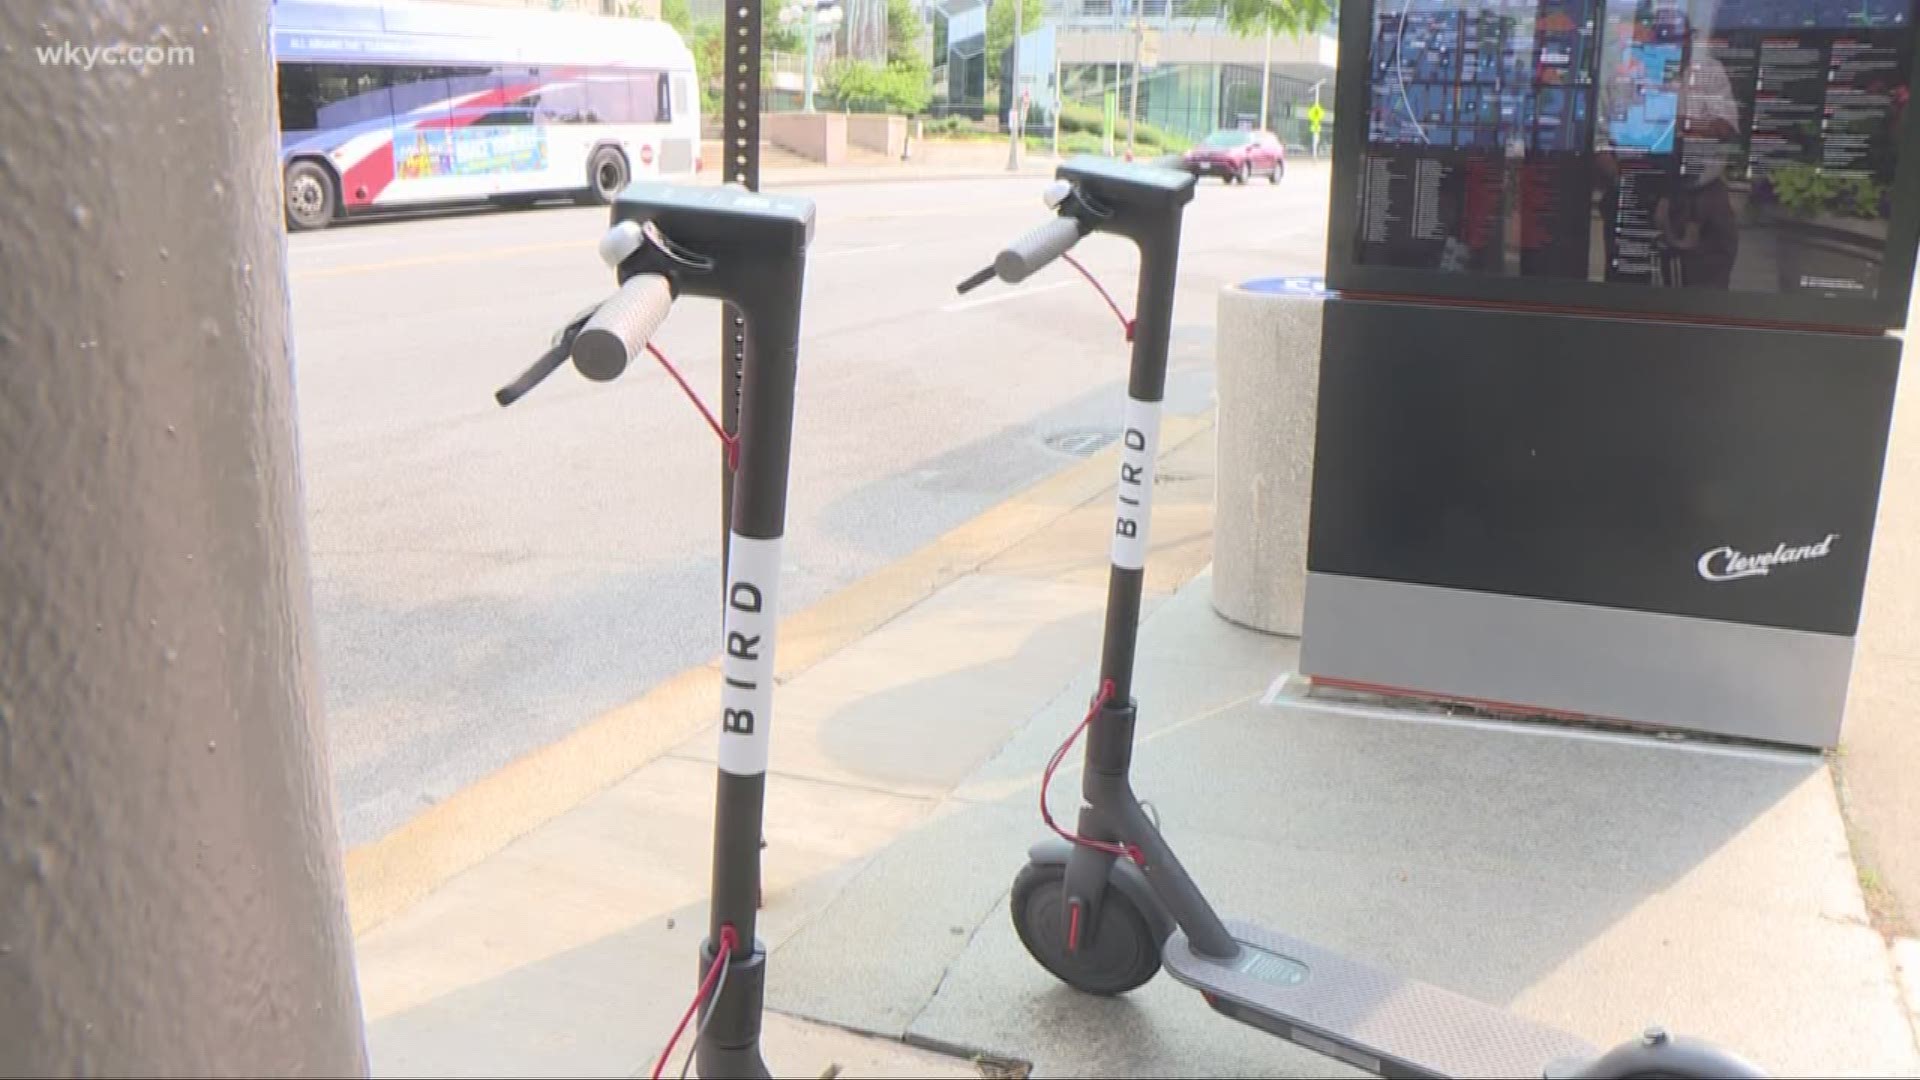 Bird Ride scooters make debut in Cleveland, city plans to confiscate unattended scooters